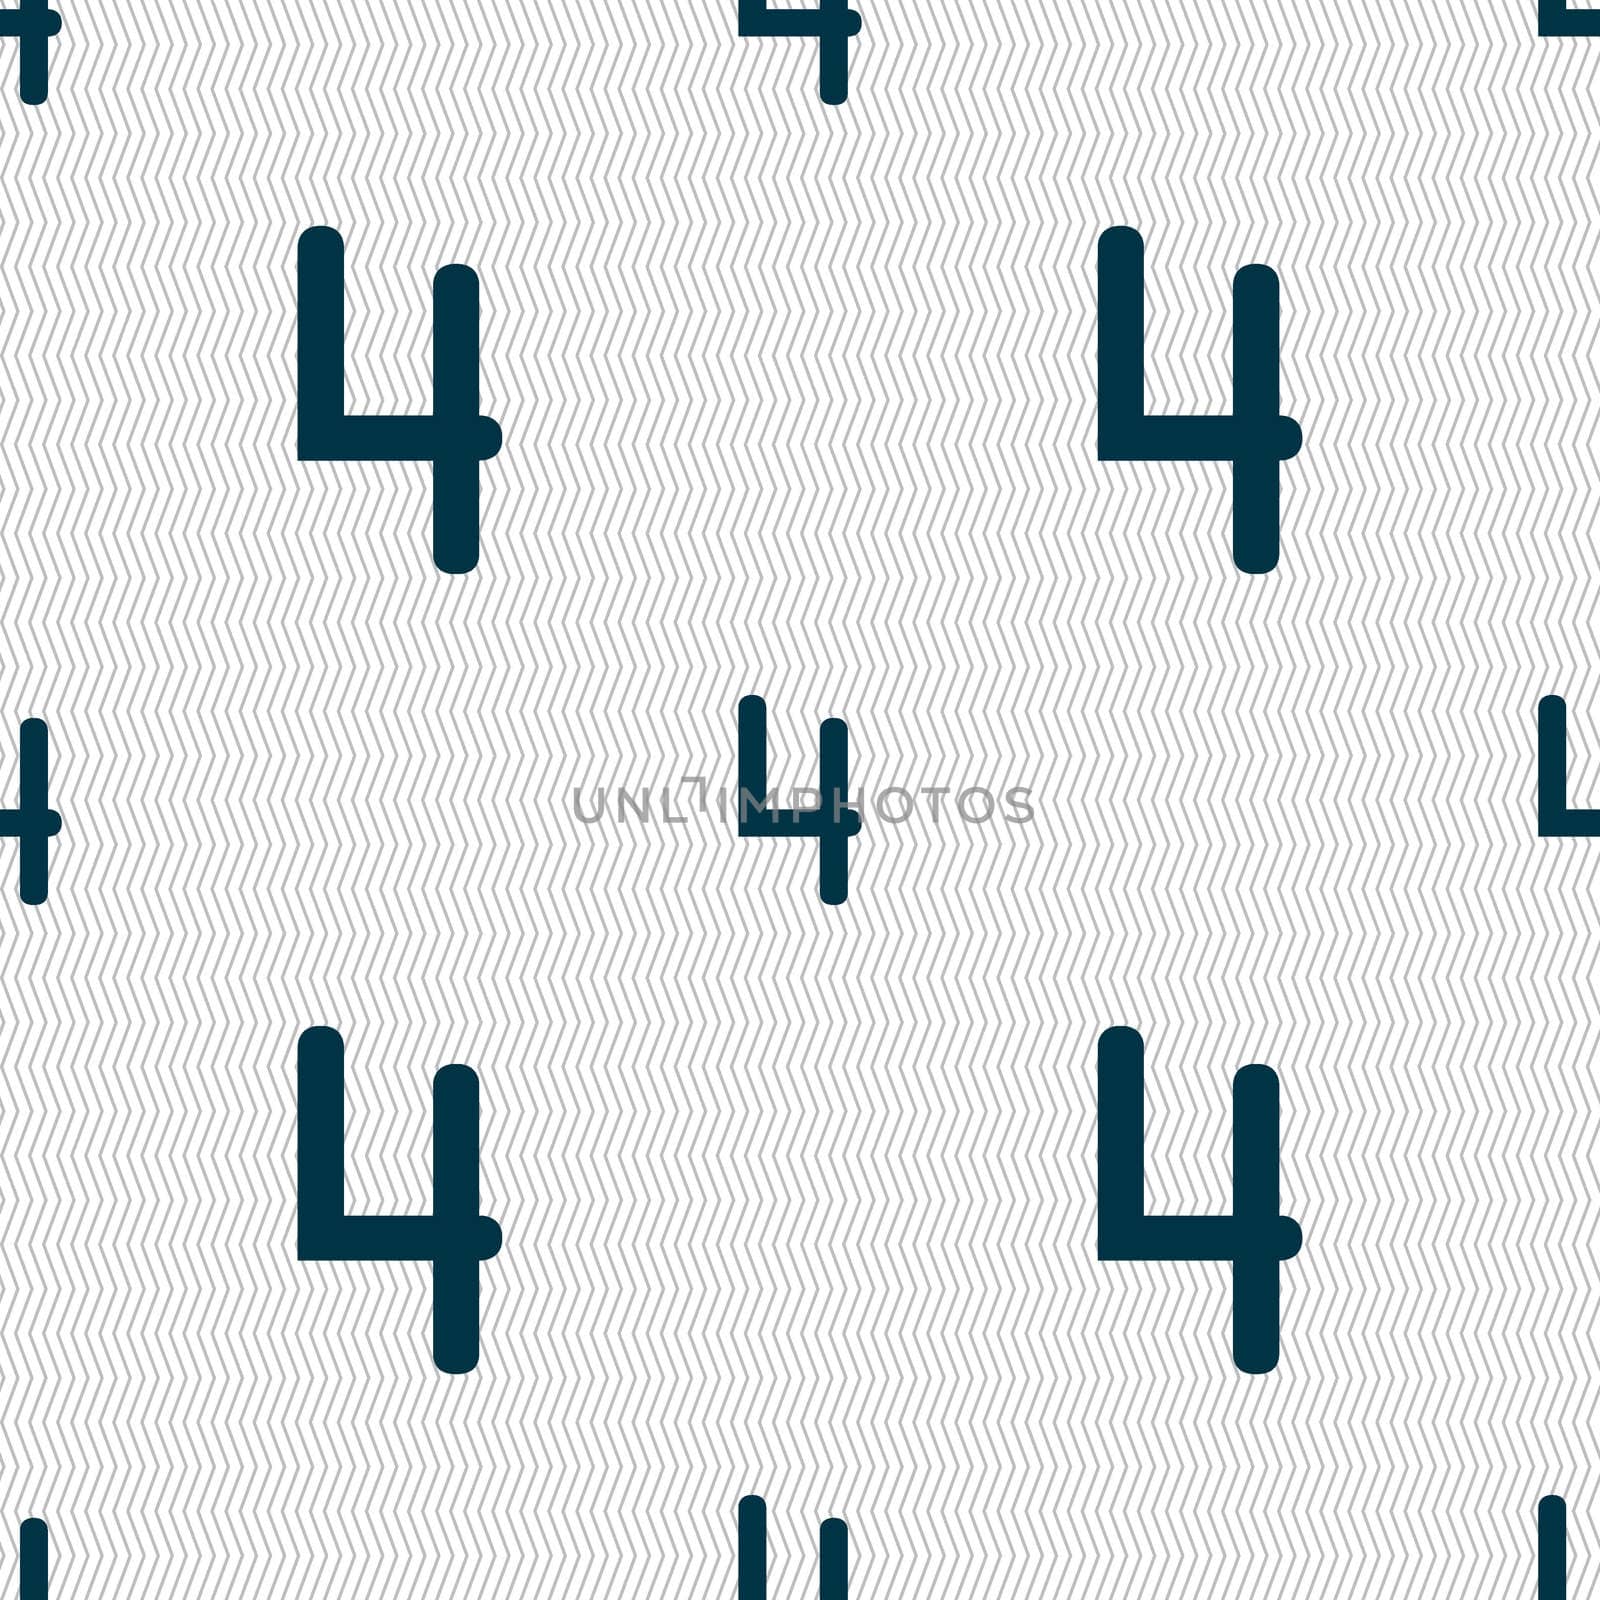 number four icon sign. Seamless abstract background with geometric shapes. illustration